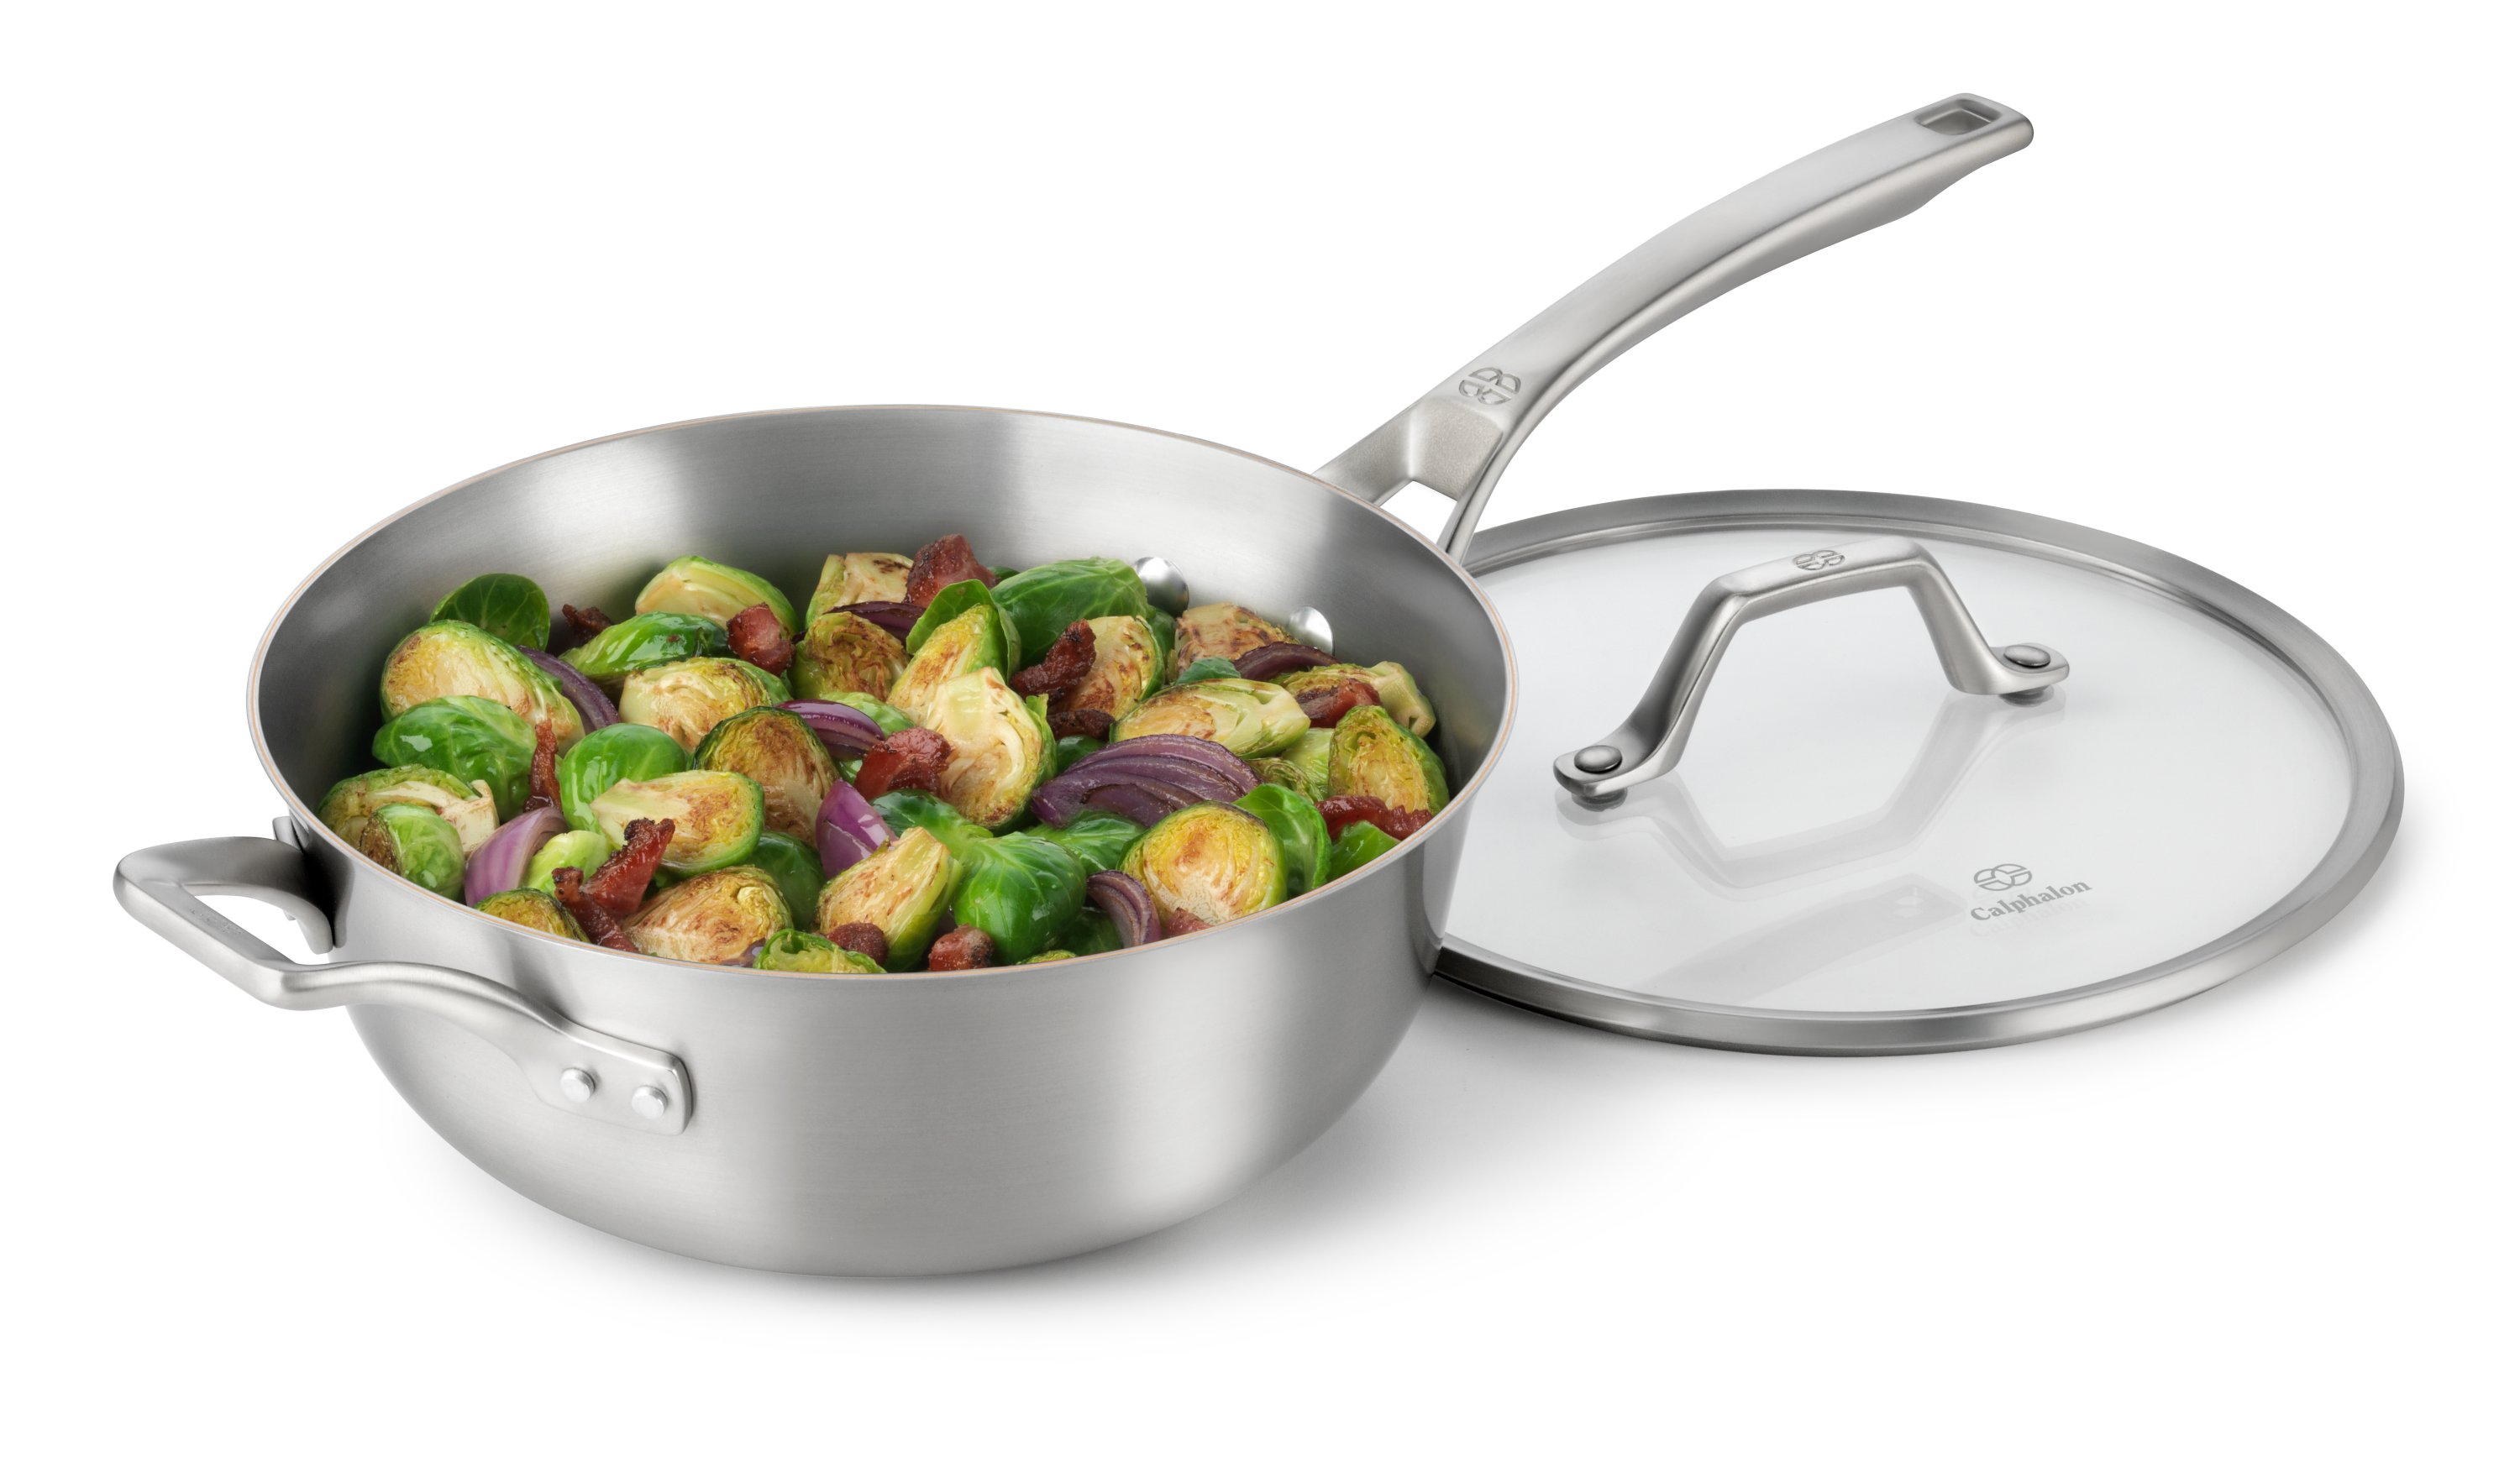 Calphalon Signature Stainless Steel 4 Qt. Chef Pan with Cover - Macy's